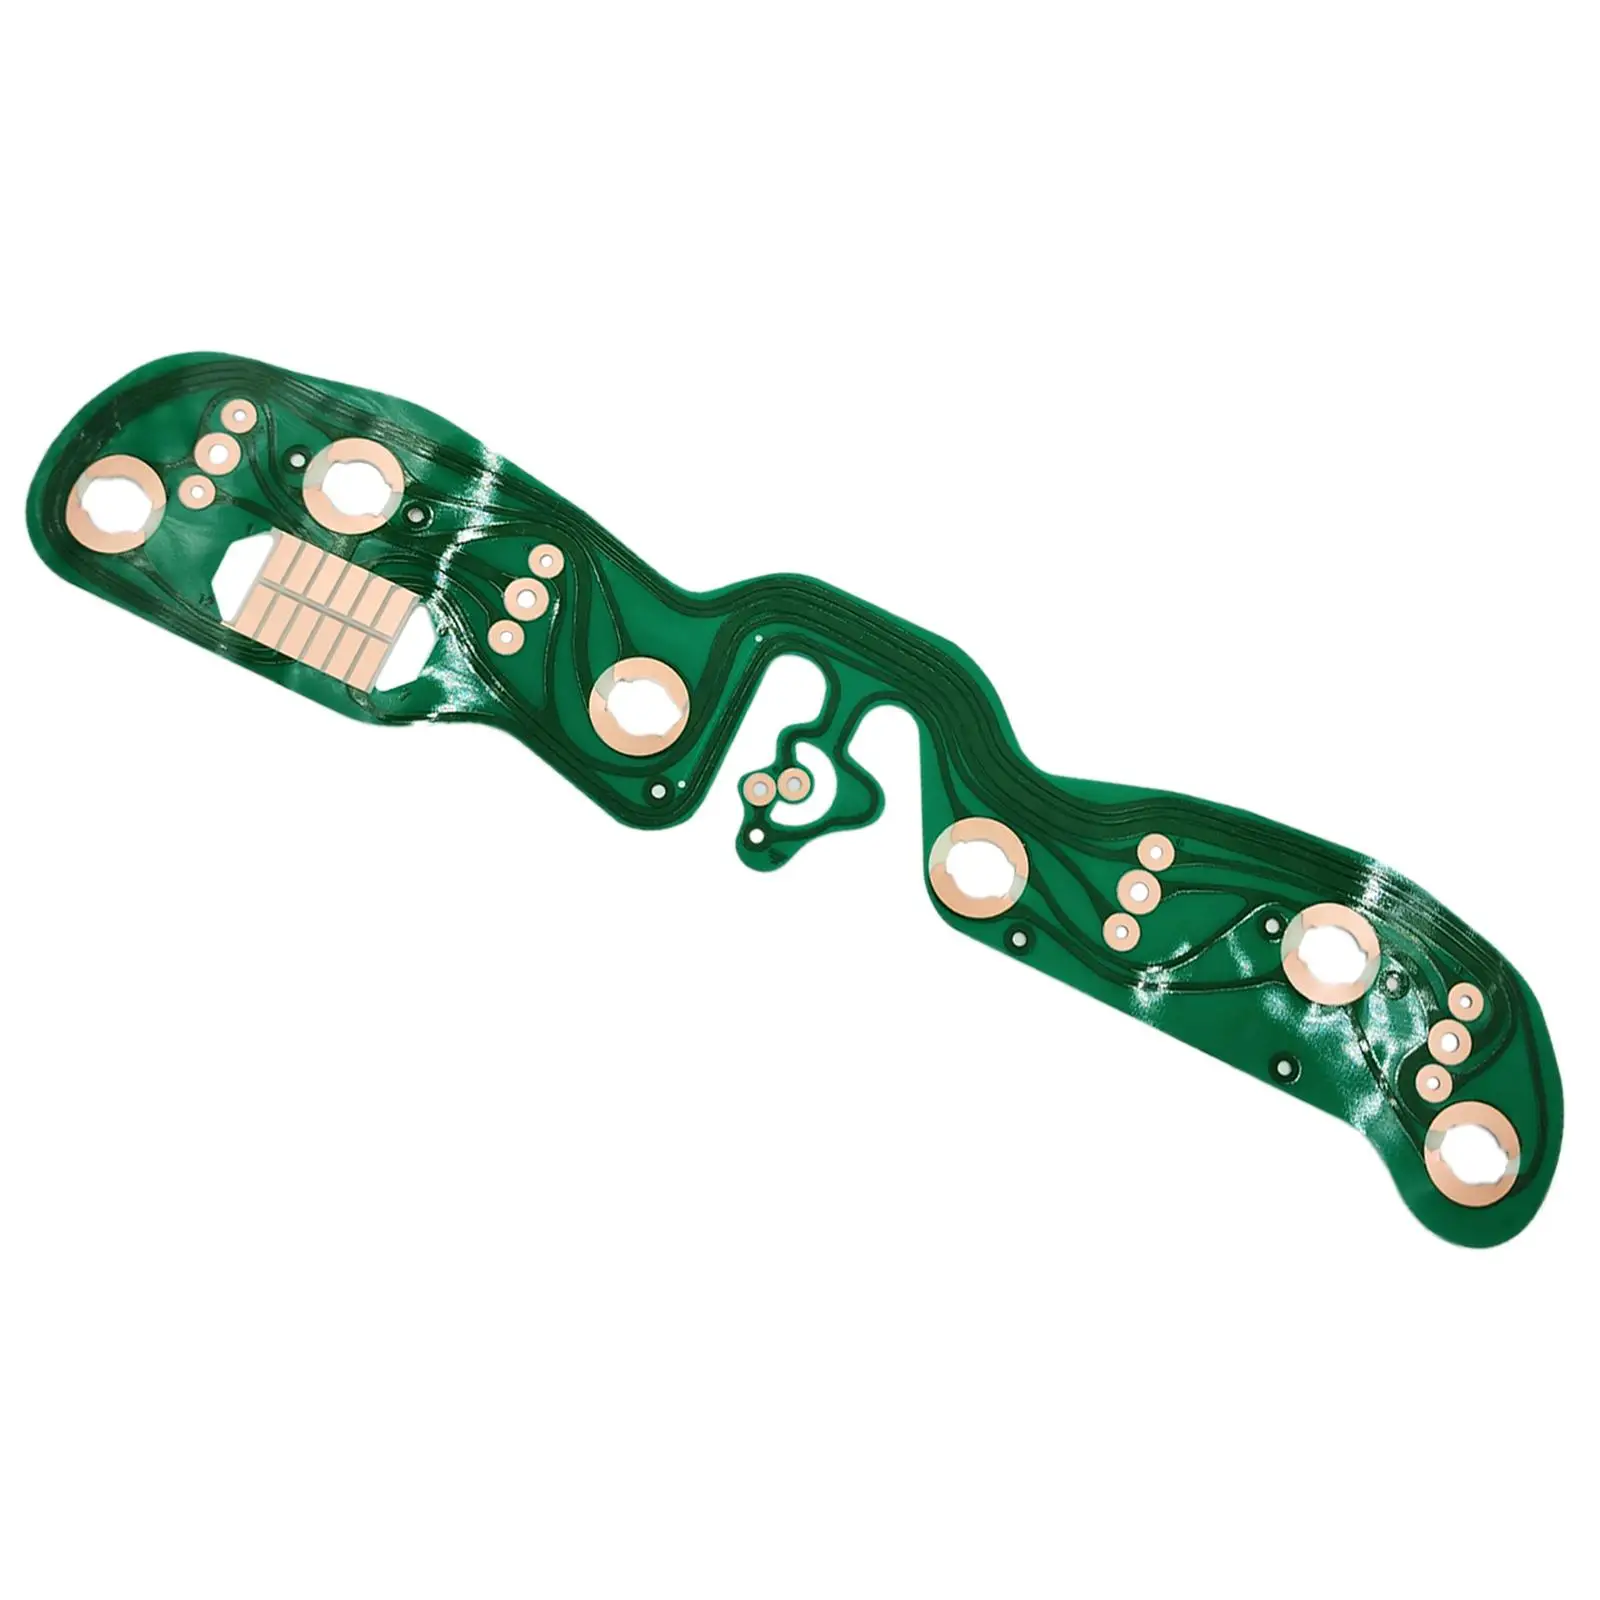 Gauges Printed Circuit Board for Jeep Wrangler easy to install